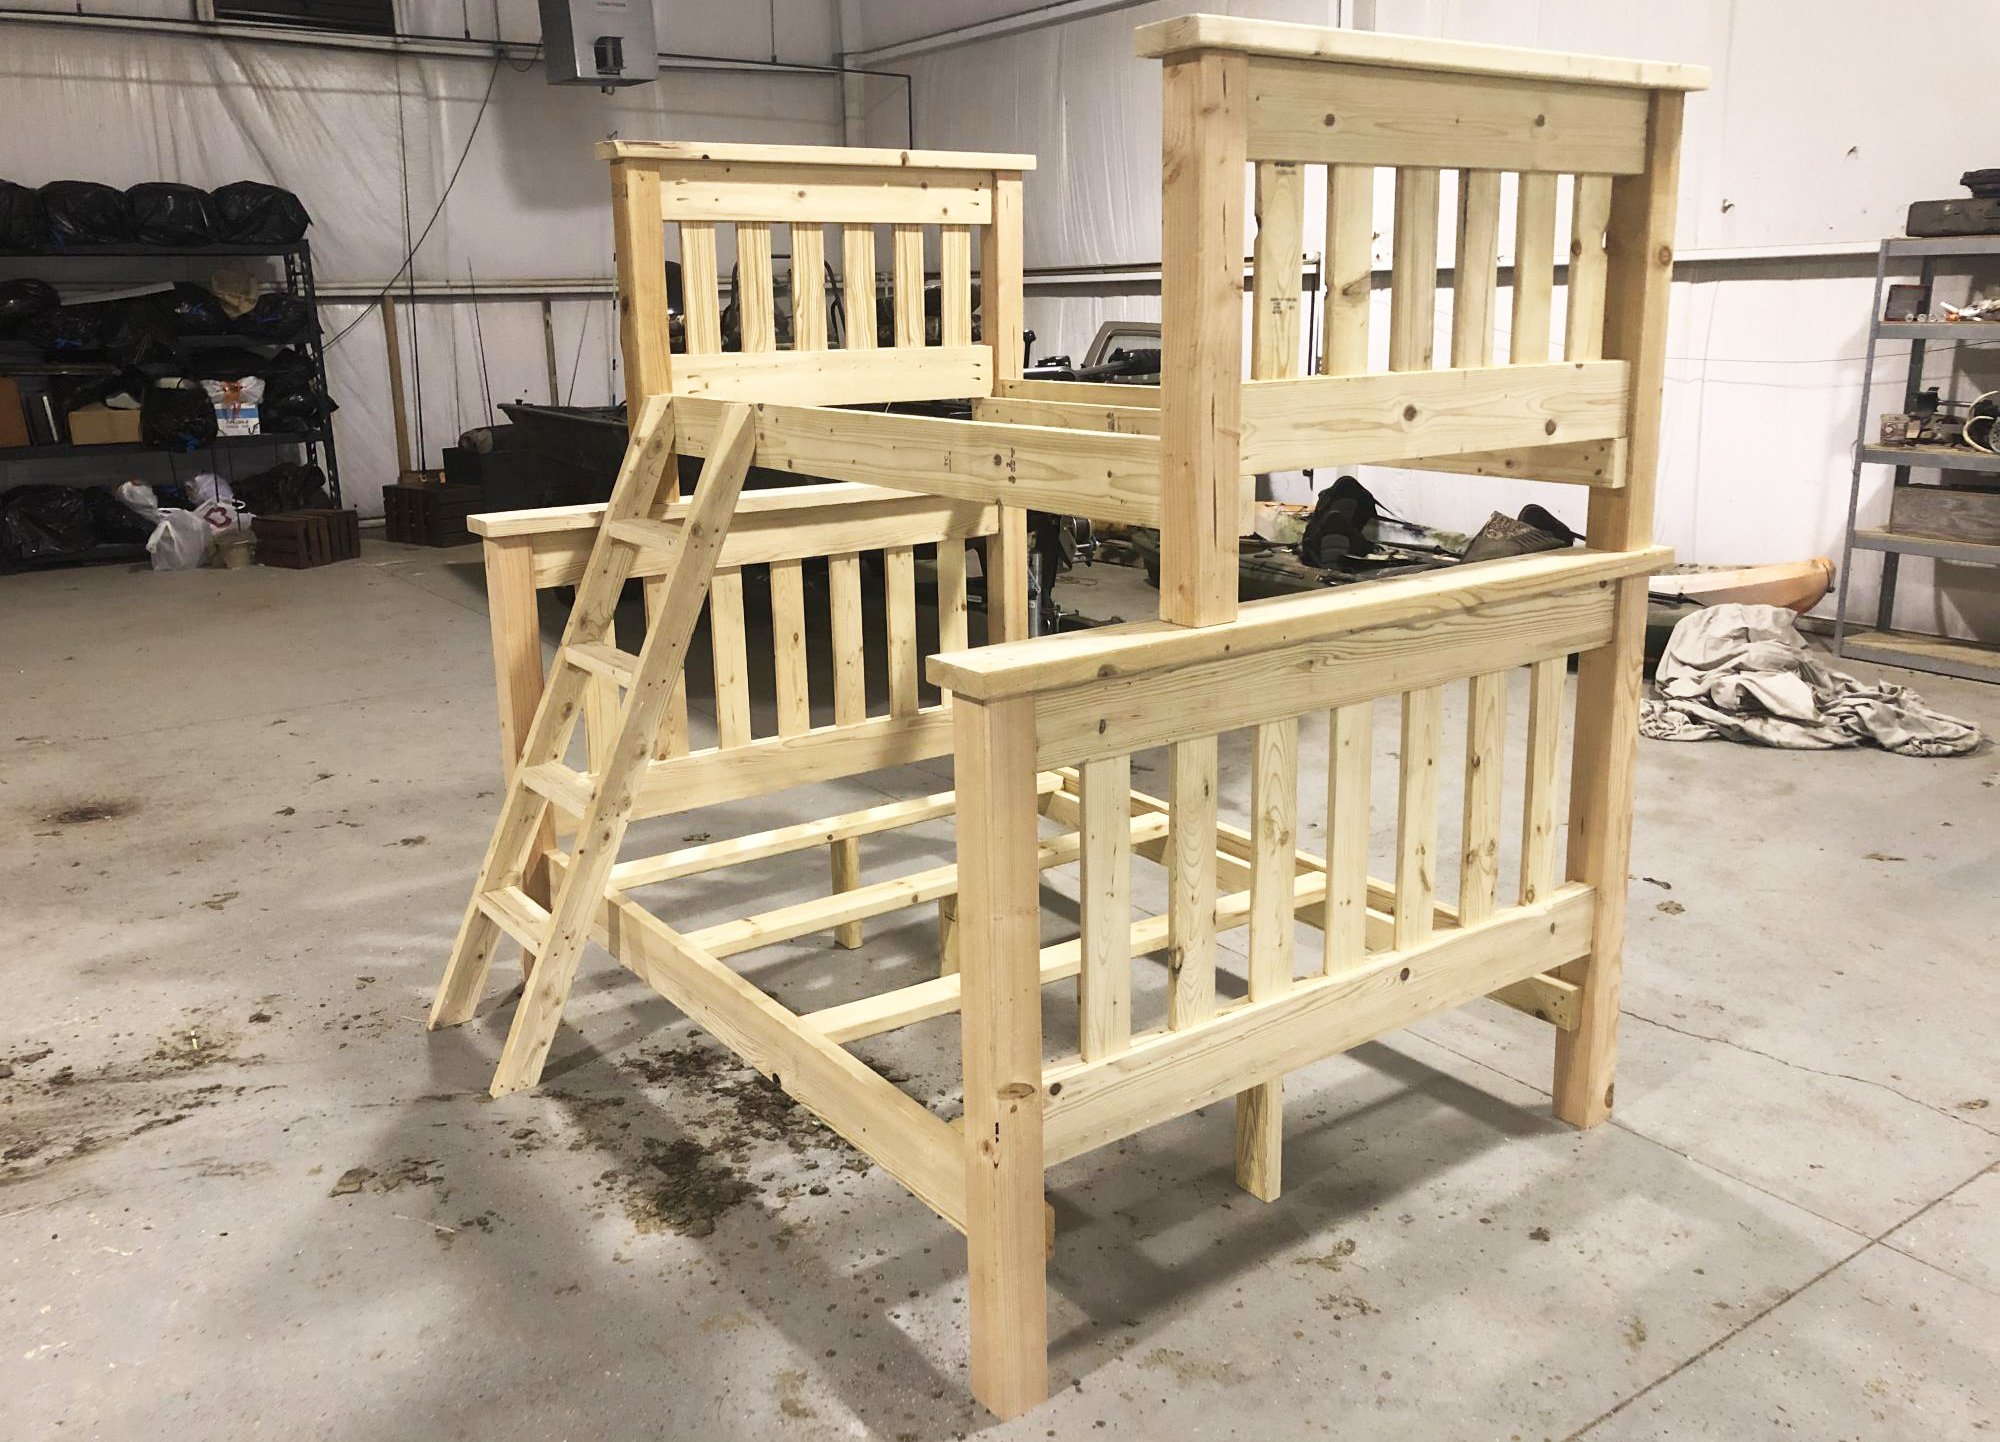 Simple Bunk Bed Plans Twin Over Full, How To Build A Full Size Bunk Bed